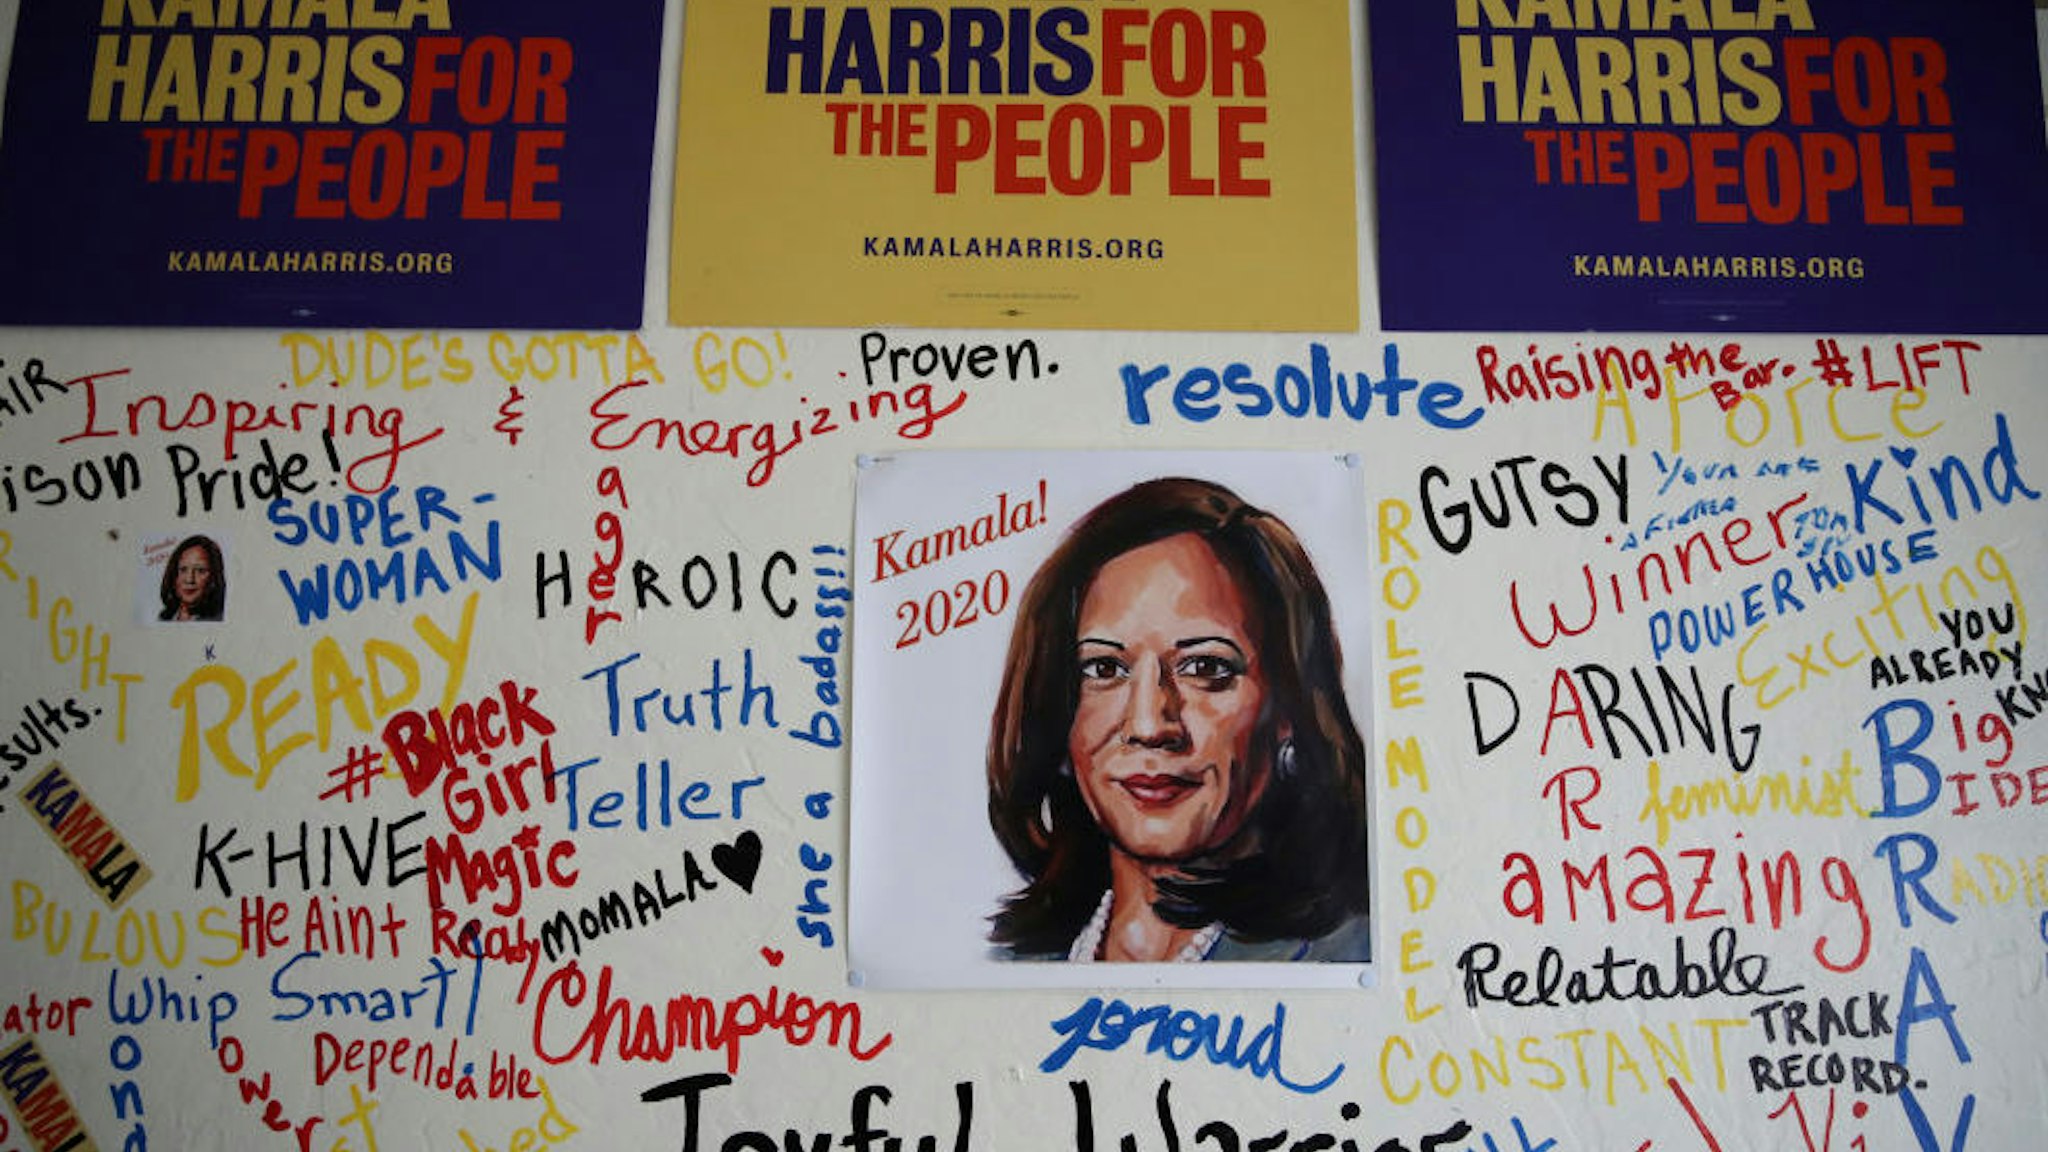 A picture of democratic presidential candidate U.S. Sen. Kamala Harris (D-CA) is displayed on a wall inside of her Oakland campaign office on December 03, 2019 in Oakland, California. Democratic presidential candidate U.S. Sen. Kamala Harris announced today that she is dropping out of the 2020 presidential race citing financial difficulties. (Photo by Justin Sullivan/Getty Images)